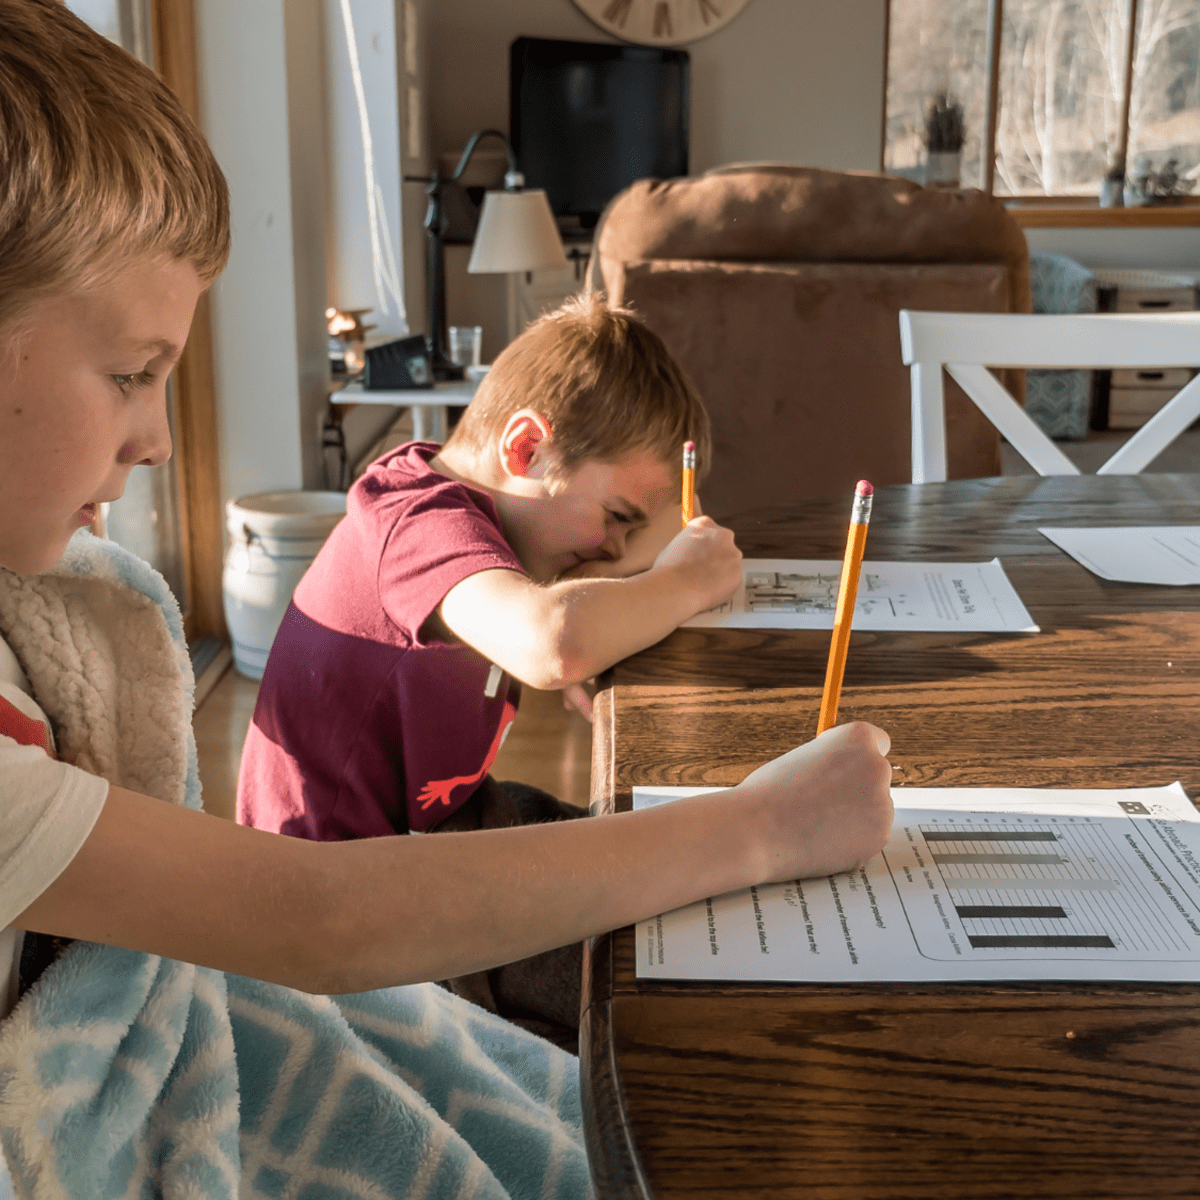 Does Homework Really Help Students Learn?, Bostonia